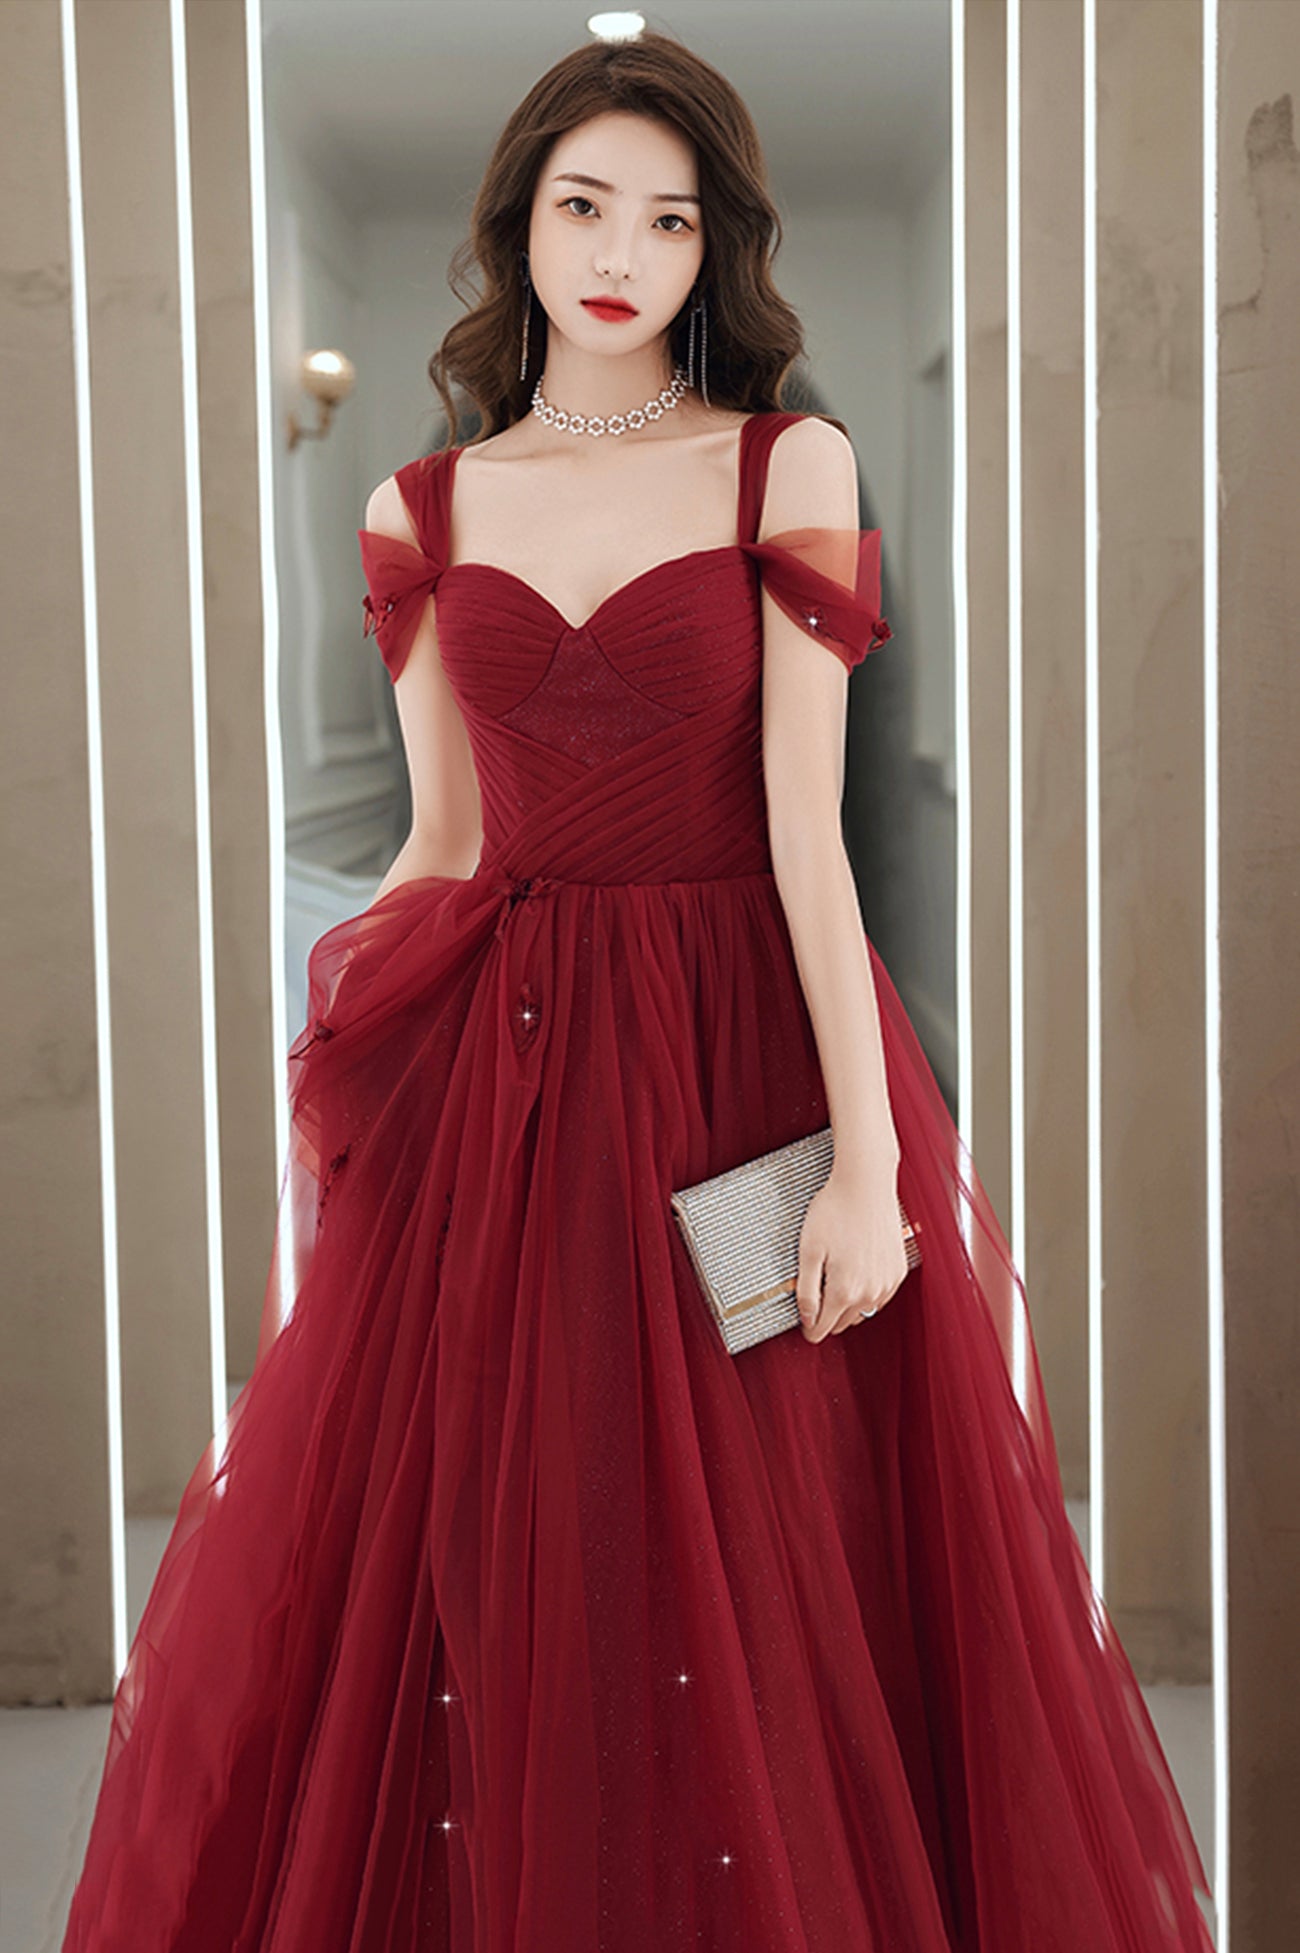 Sexy Burgundy Low Back Evening Gown - TheCelebrityDresses